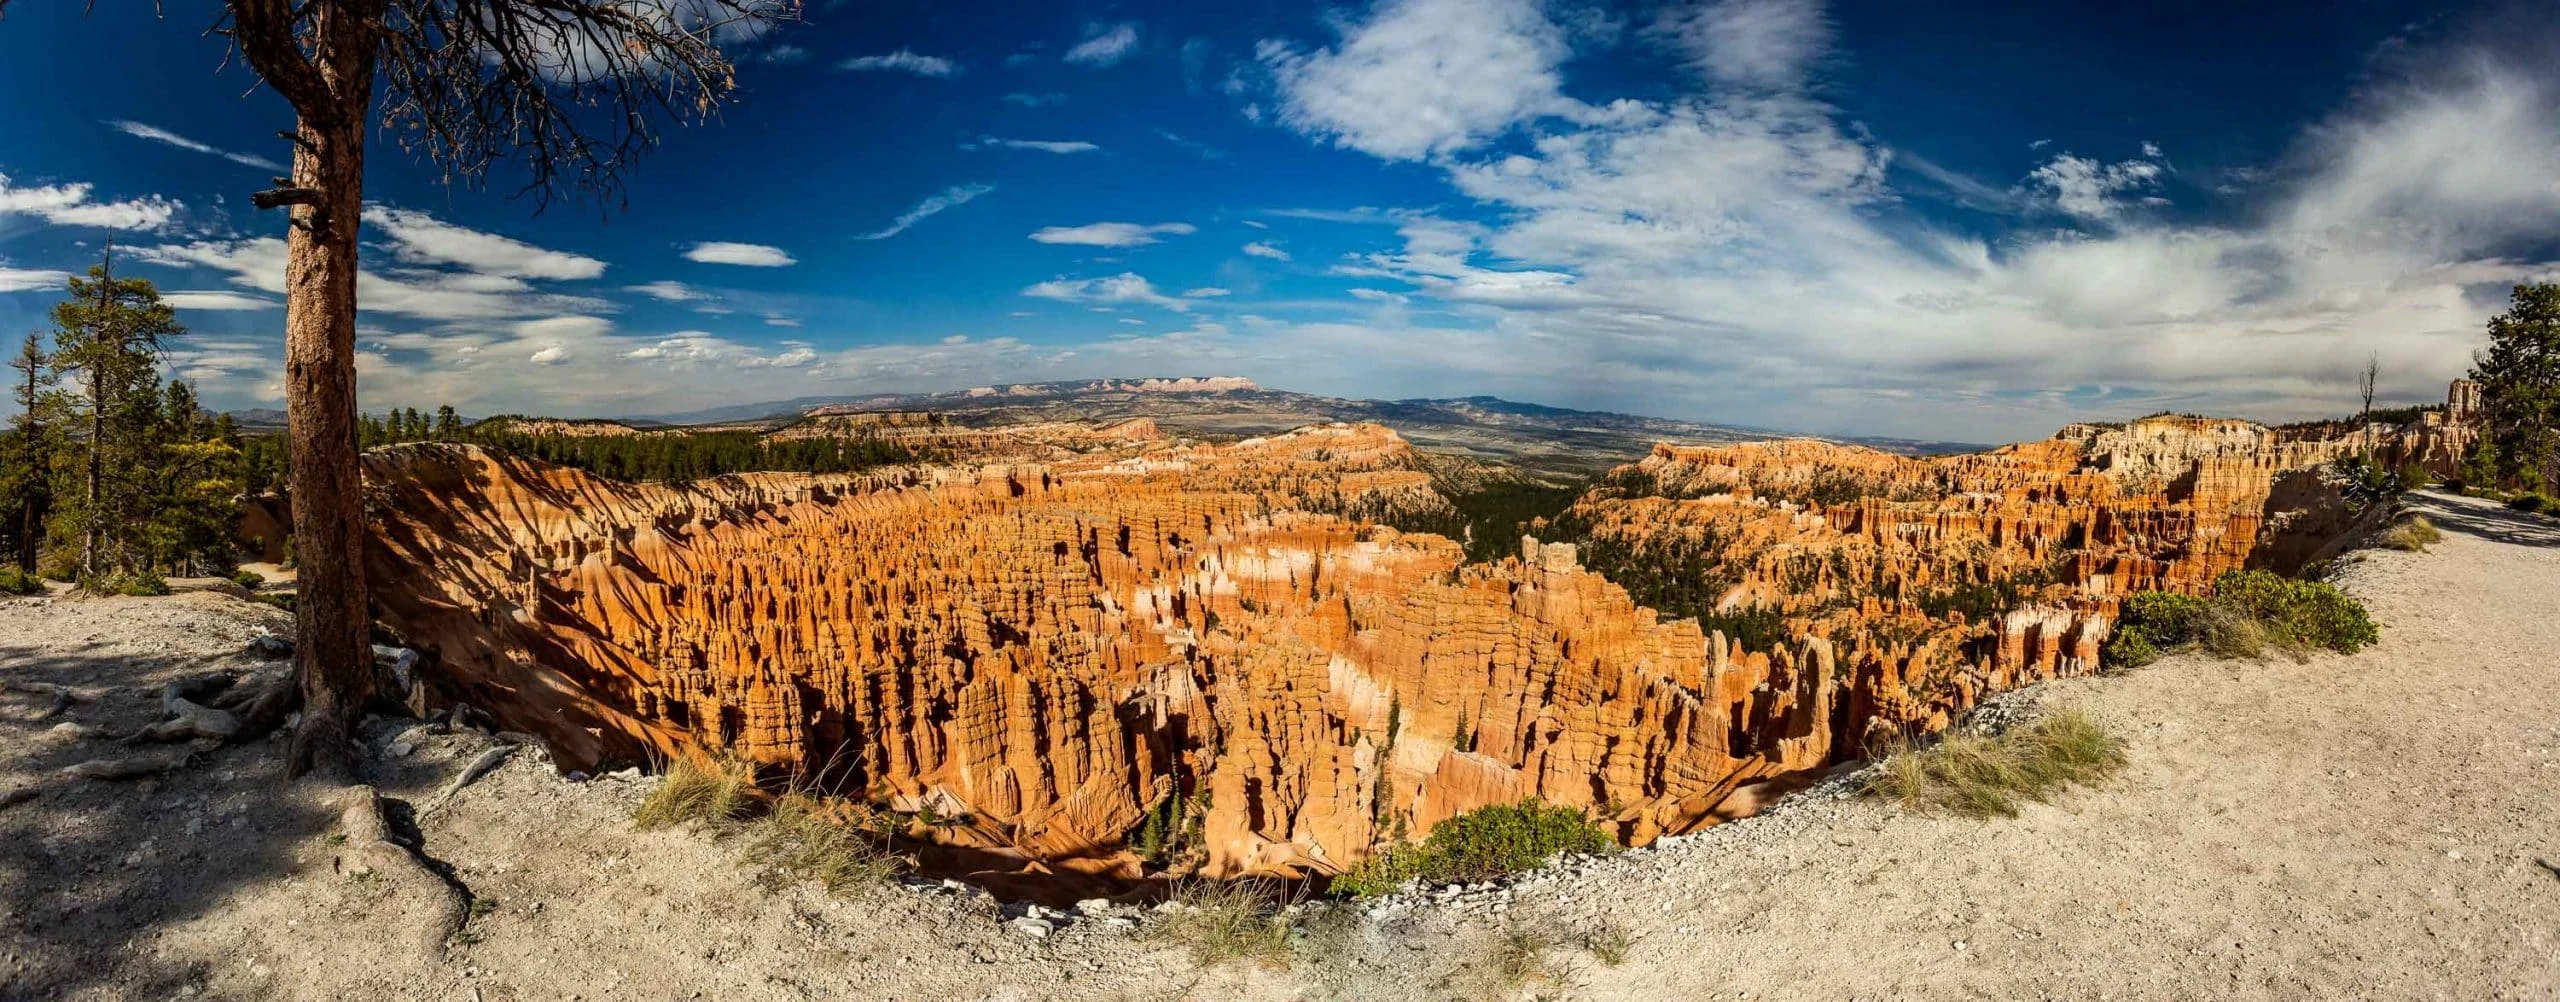 A colorful panoramic image of Bryce Canyon amphitheater taken from the Rim trail.